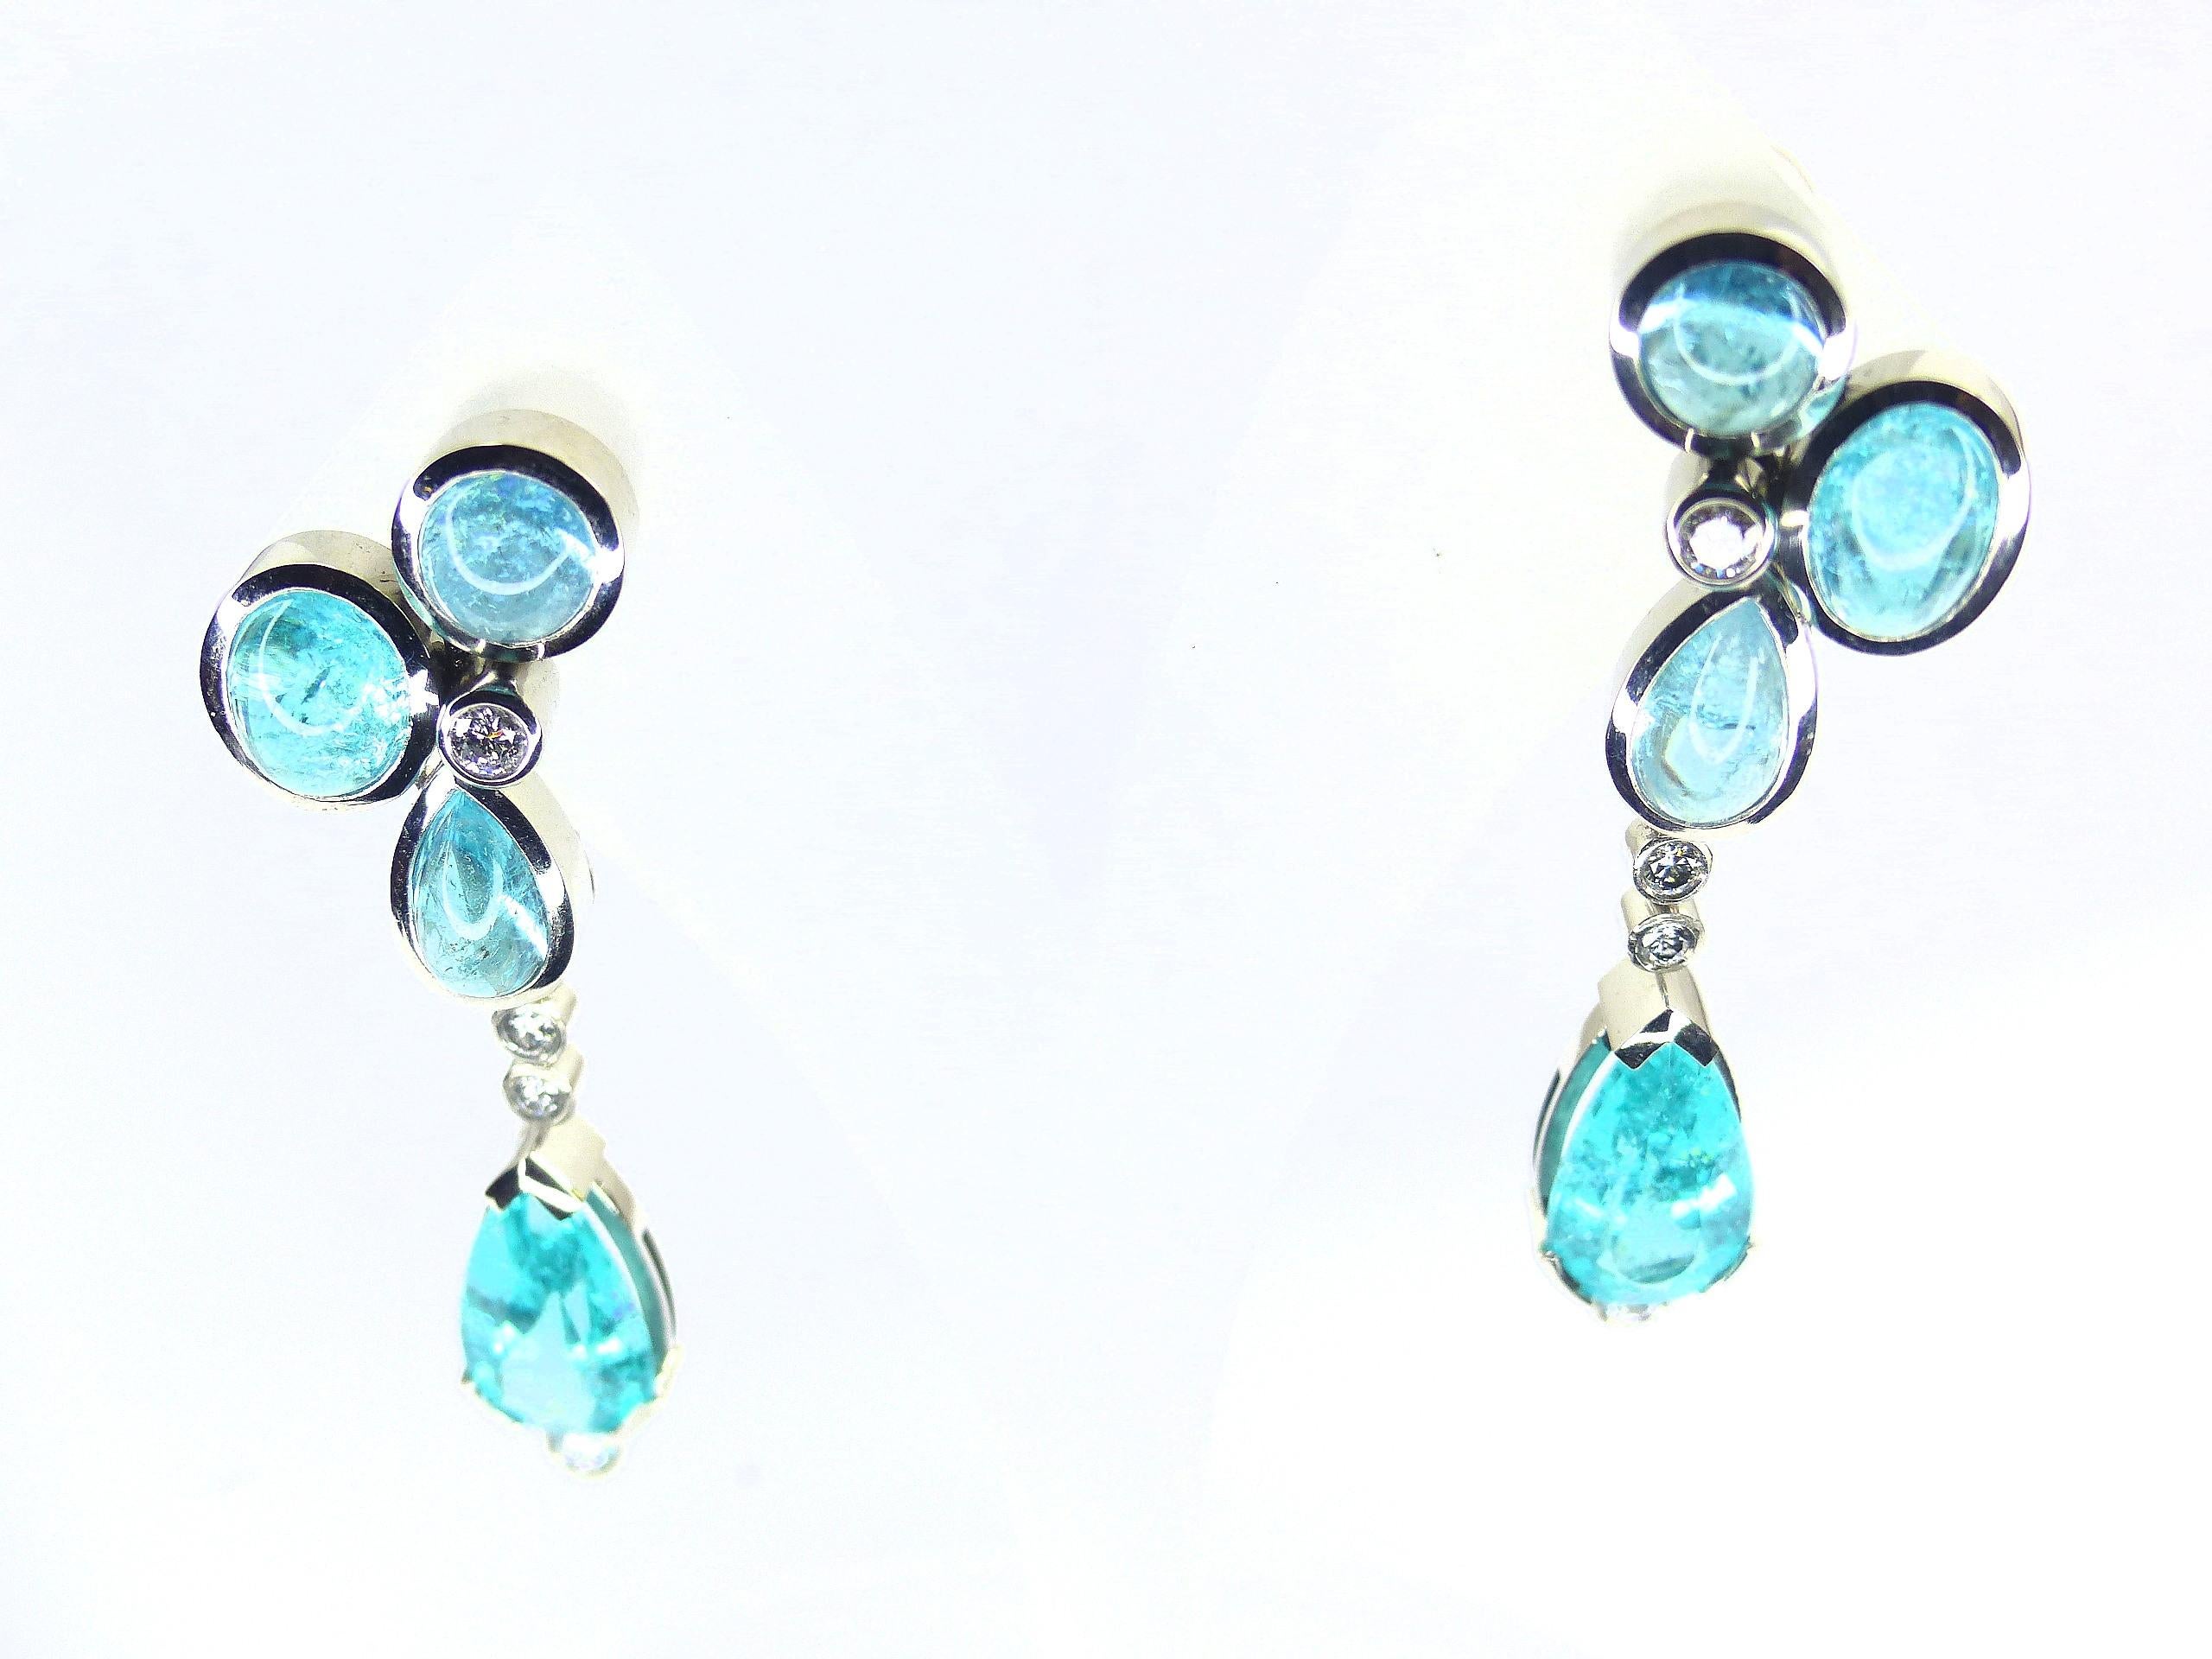 Earrings in Platinum with 6 Paraiba Tourmaline Cabouchons and 2 Diamonds For Sale 3